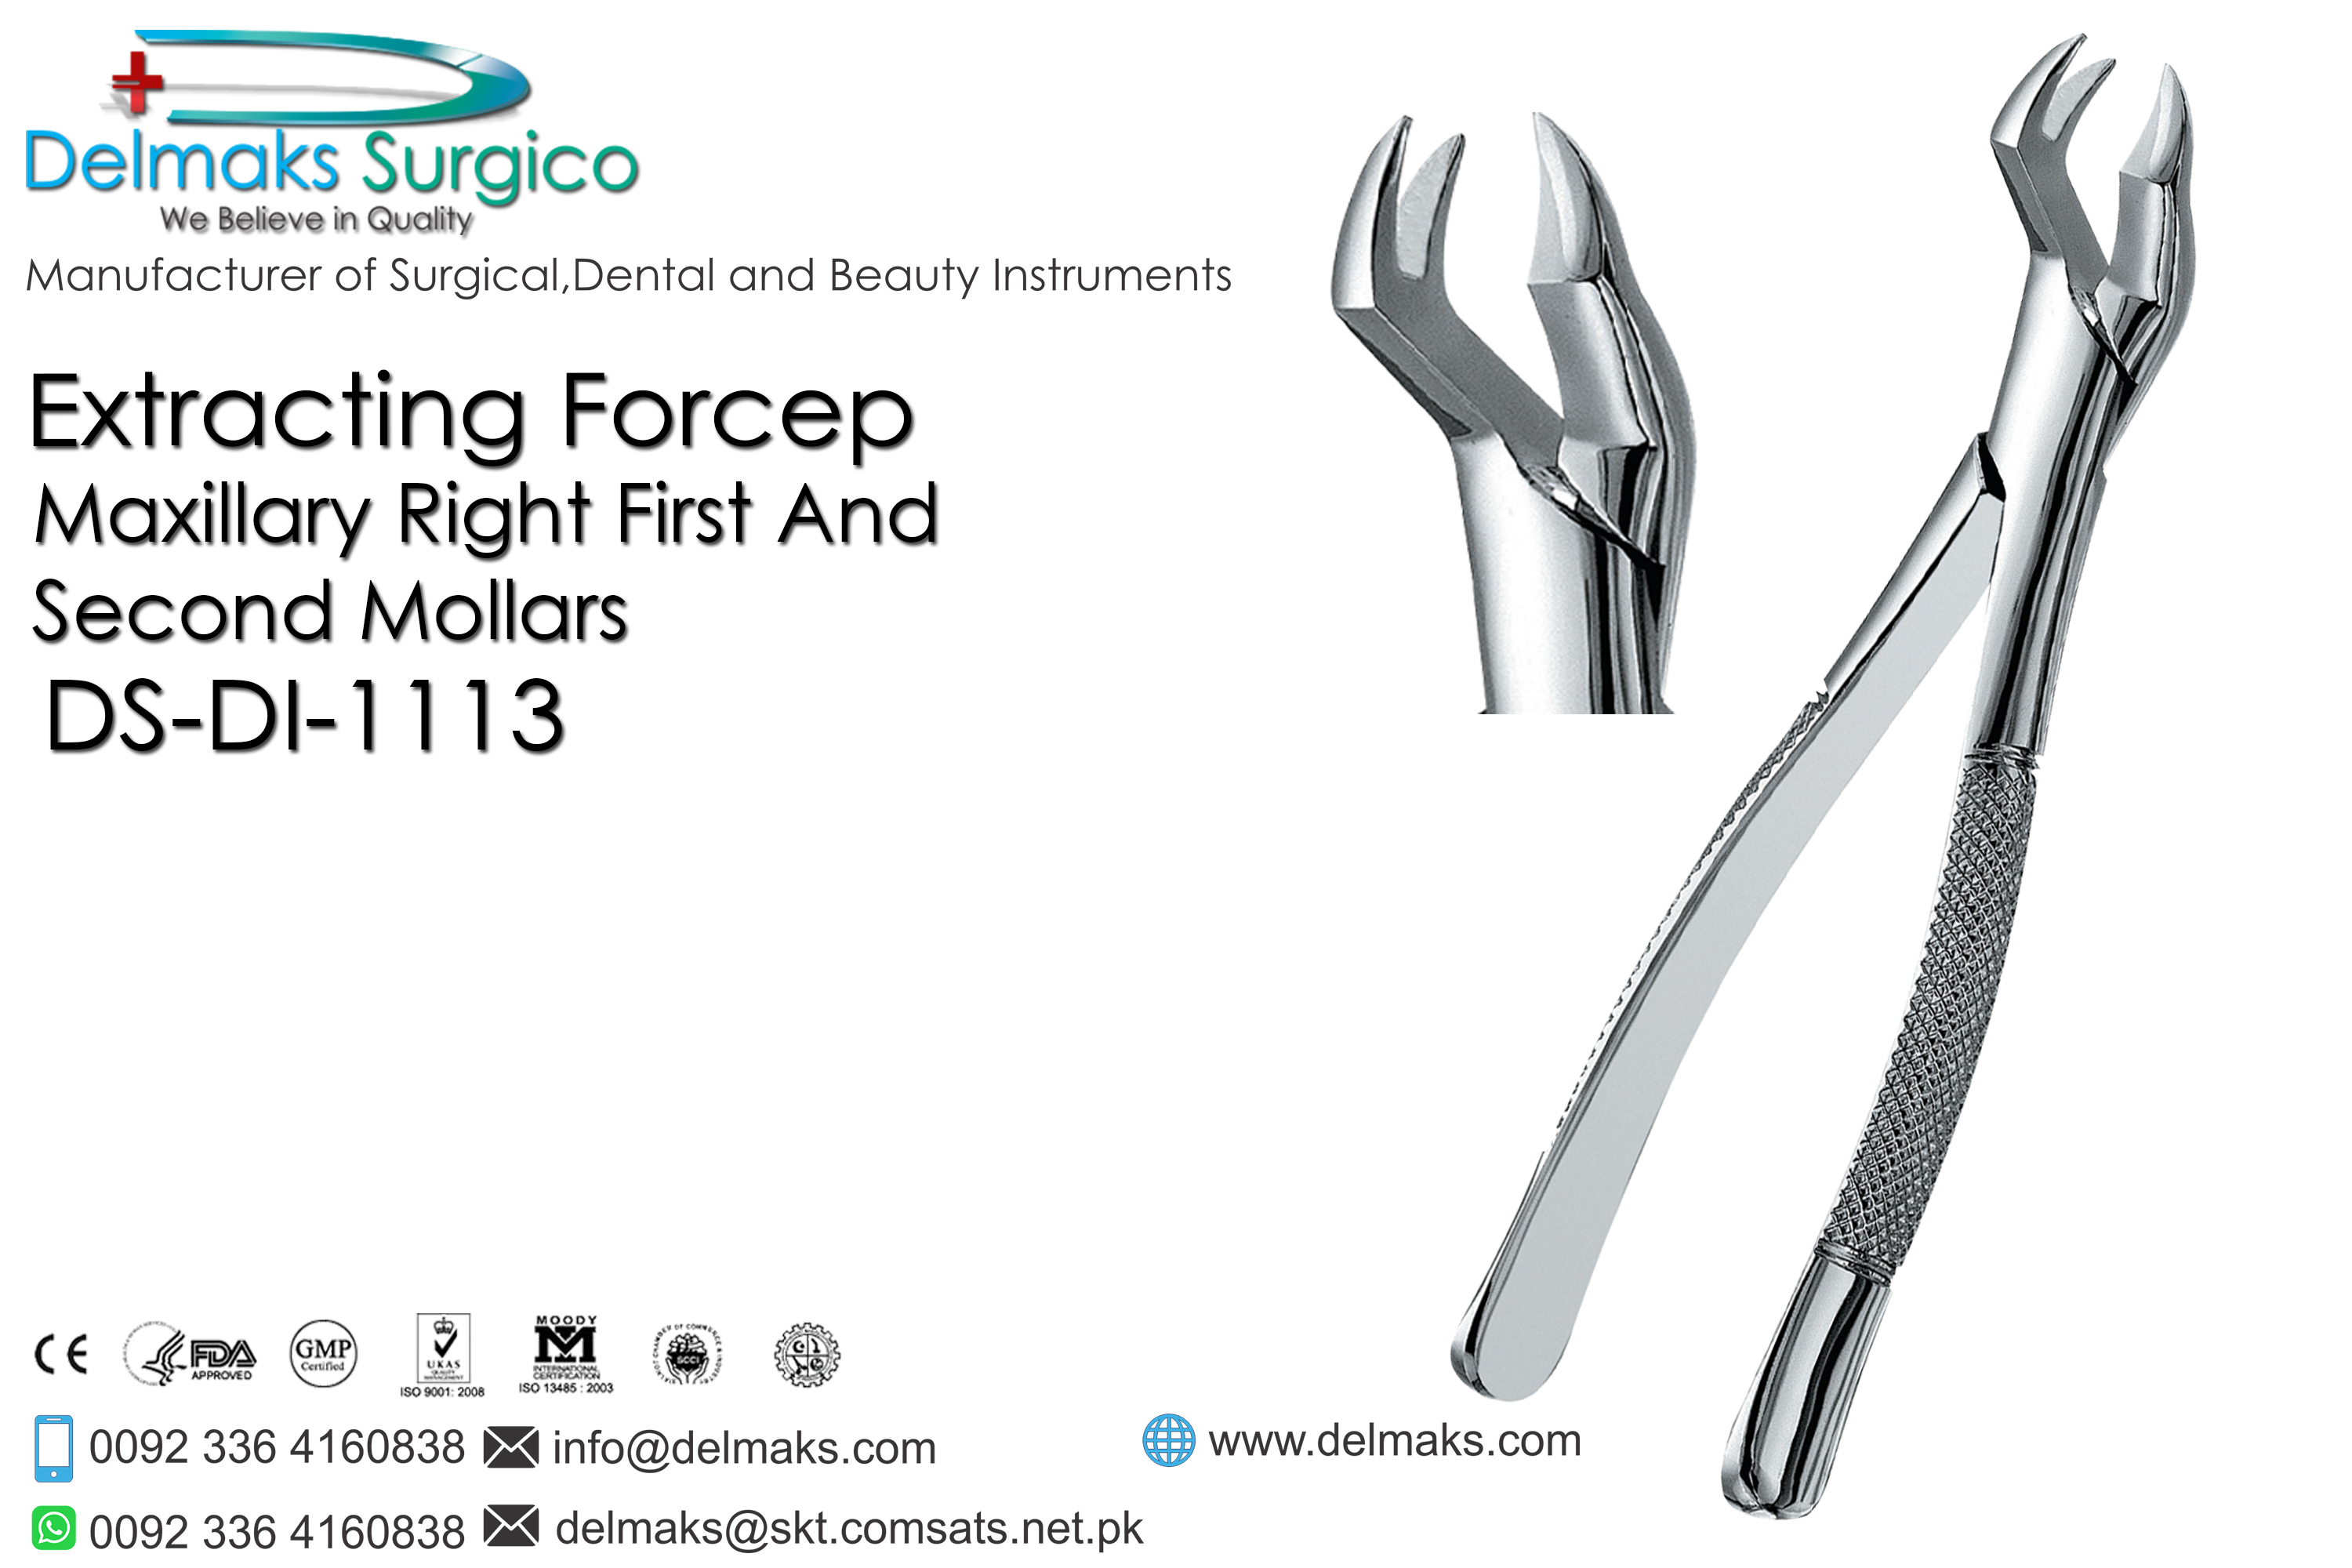 Extracting Forceps (Maxillary Right First And Second Mollars)-Oral and Maxillofacial Surgery Instruments-Dental Instruments-Delmaks Surgico 